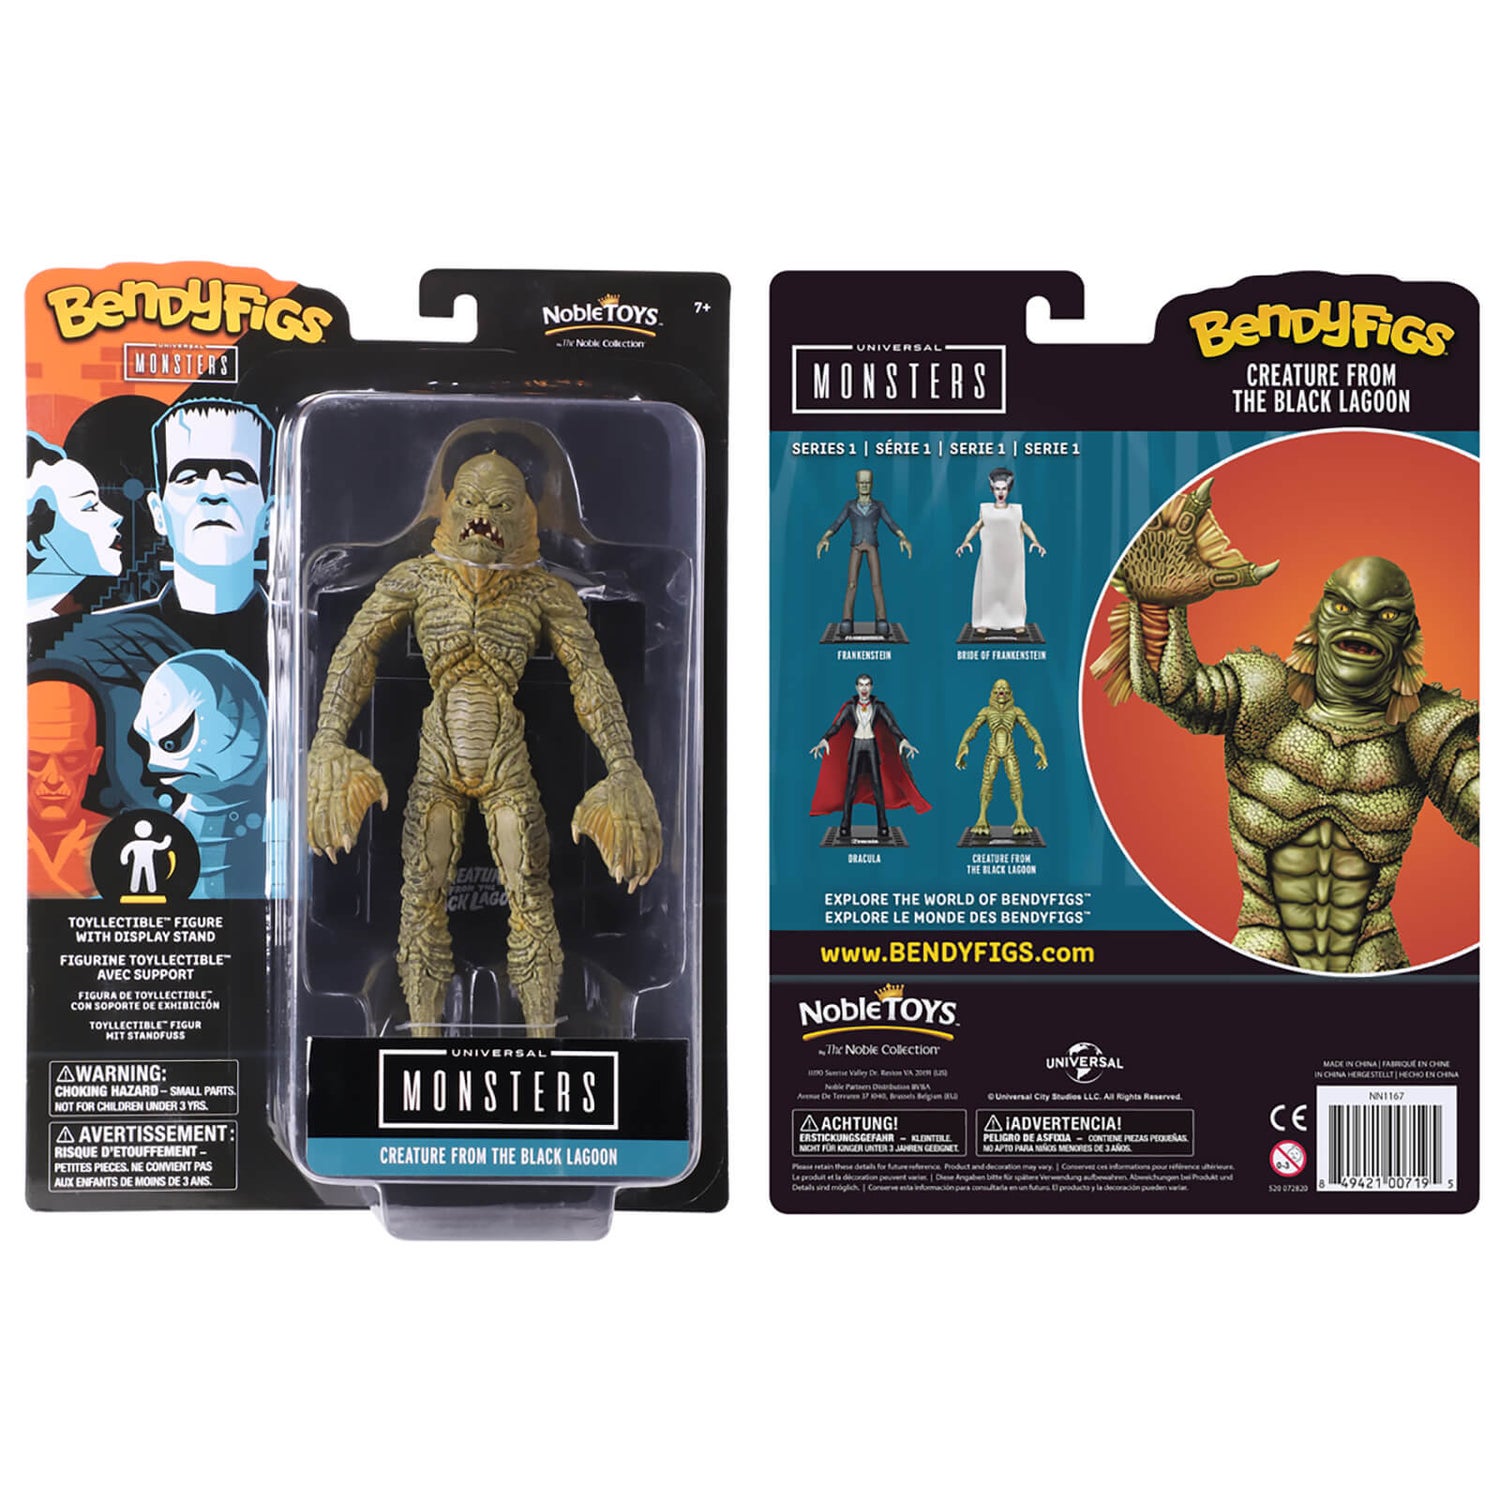 Universal Monsters Creature from the Black Lagoon Bendyfig